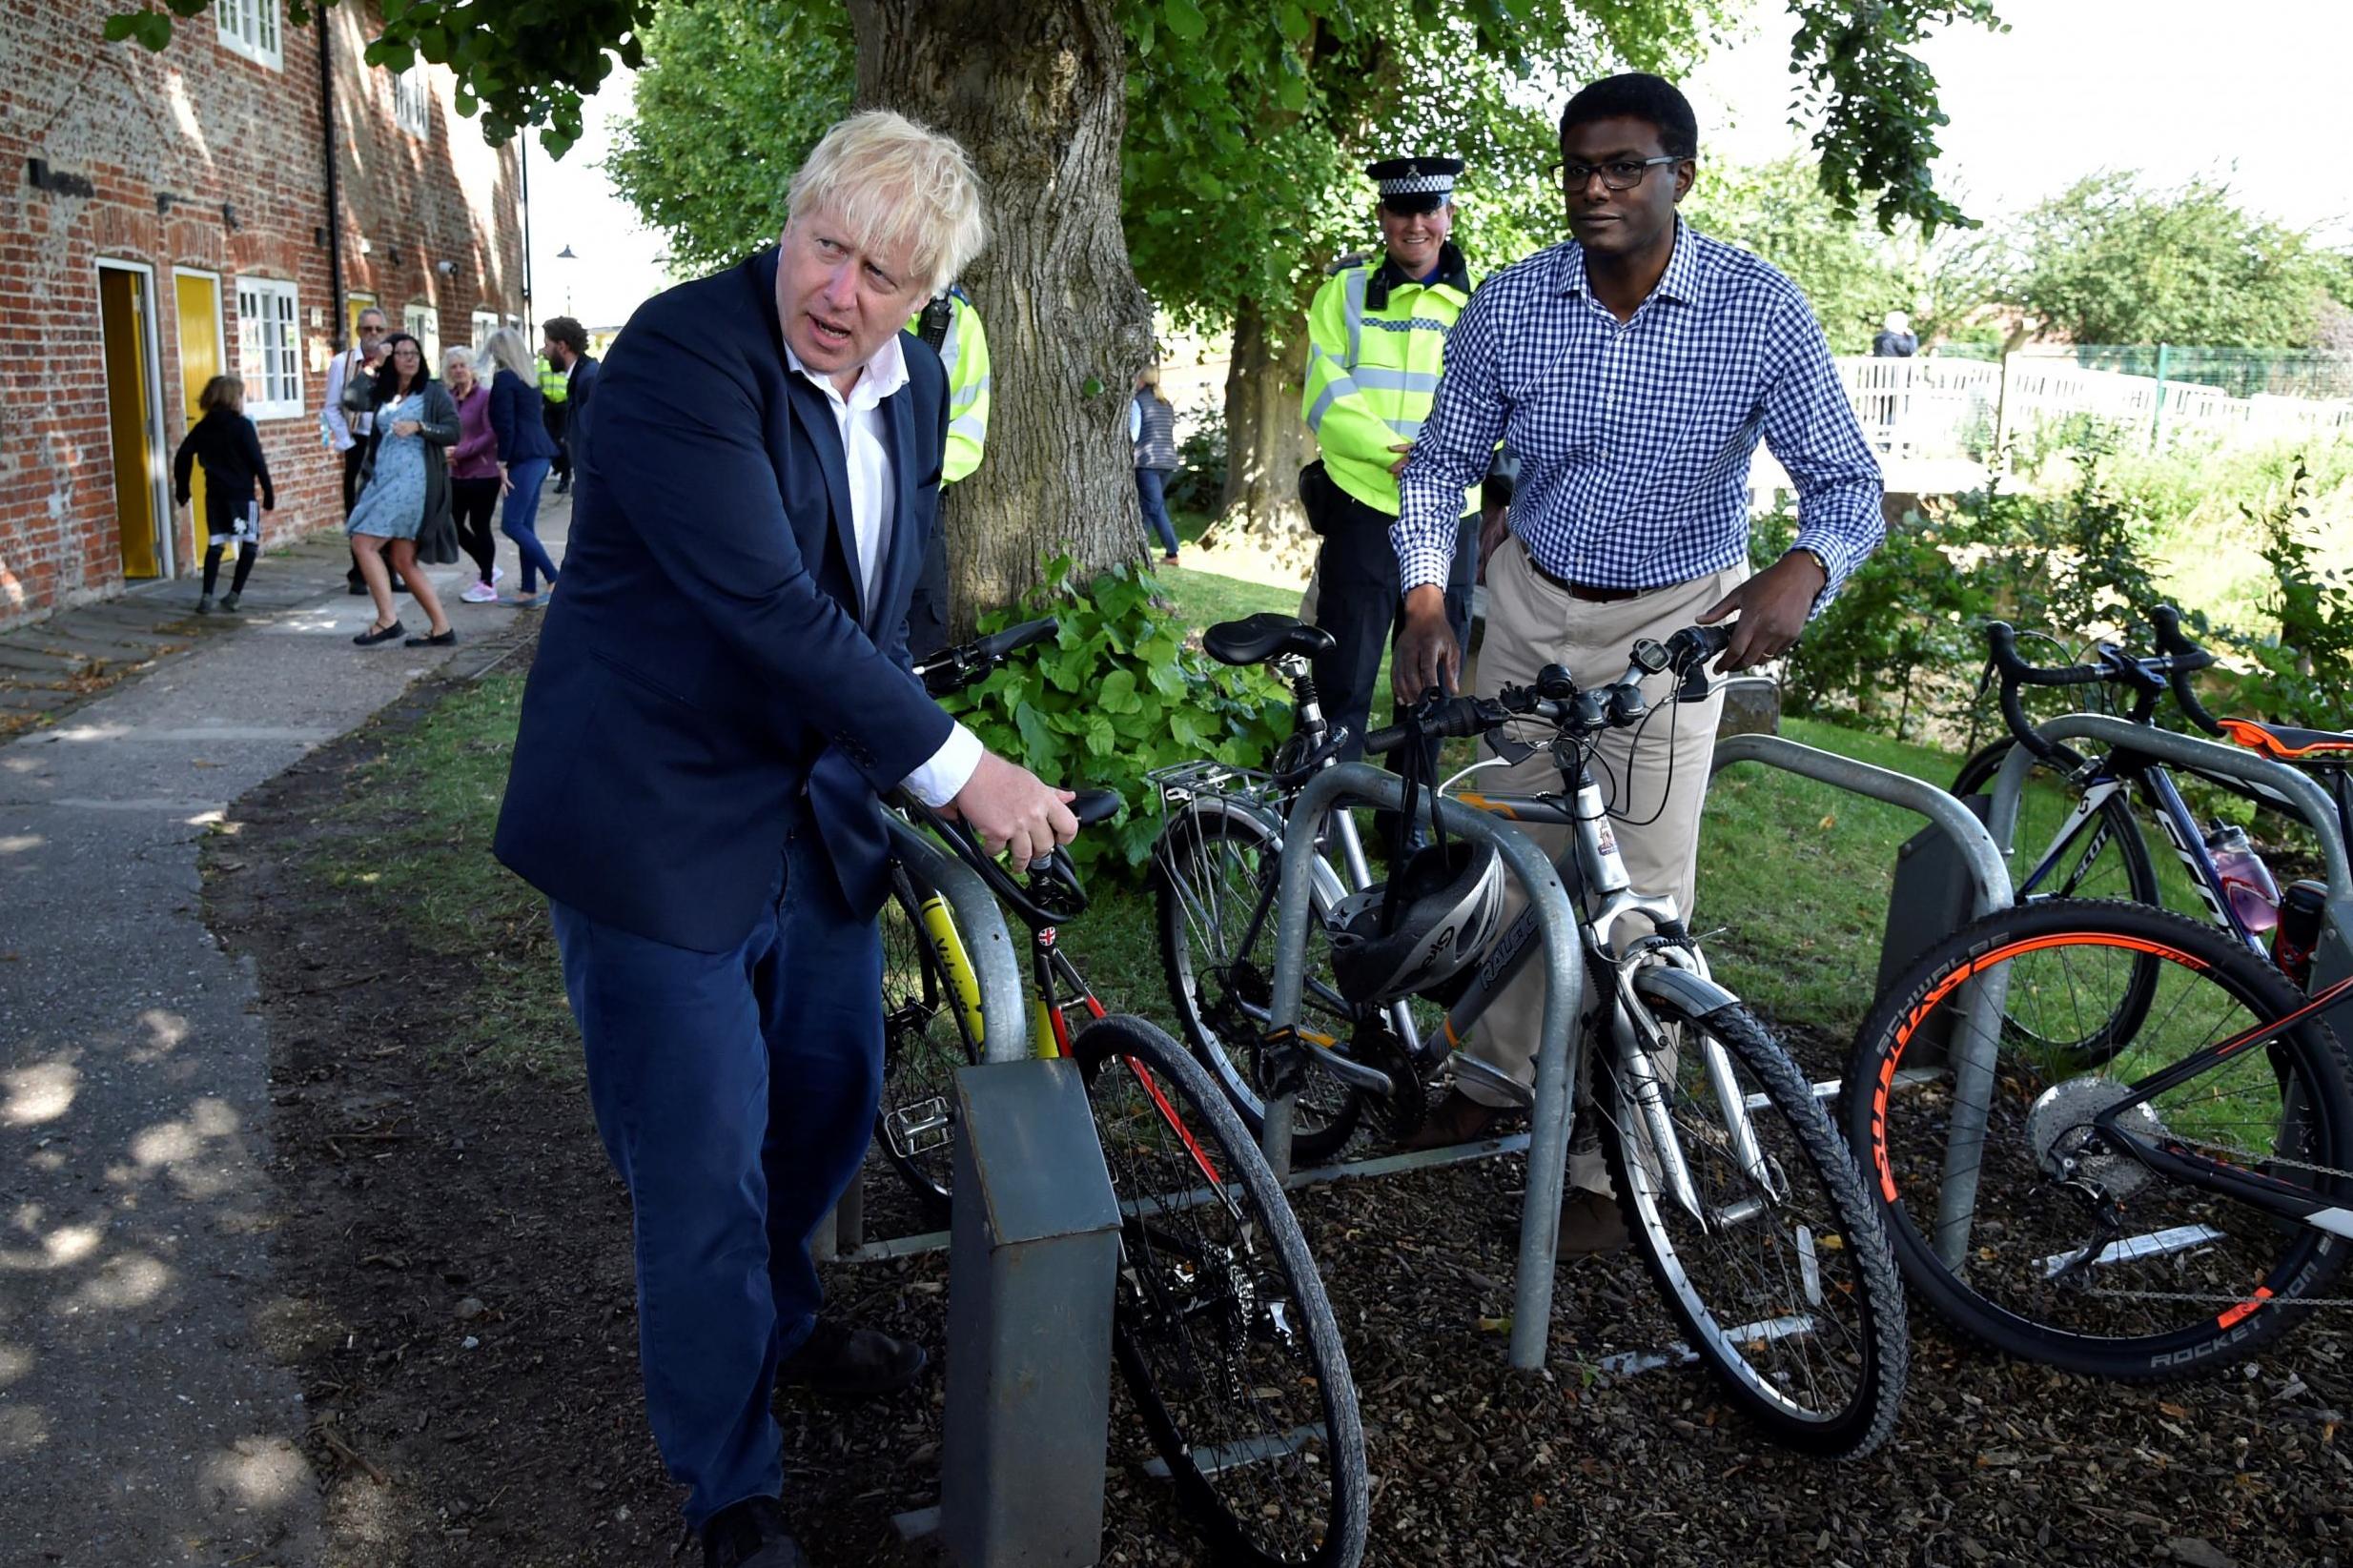 The PM at an event to launch his new cycling initiative